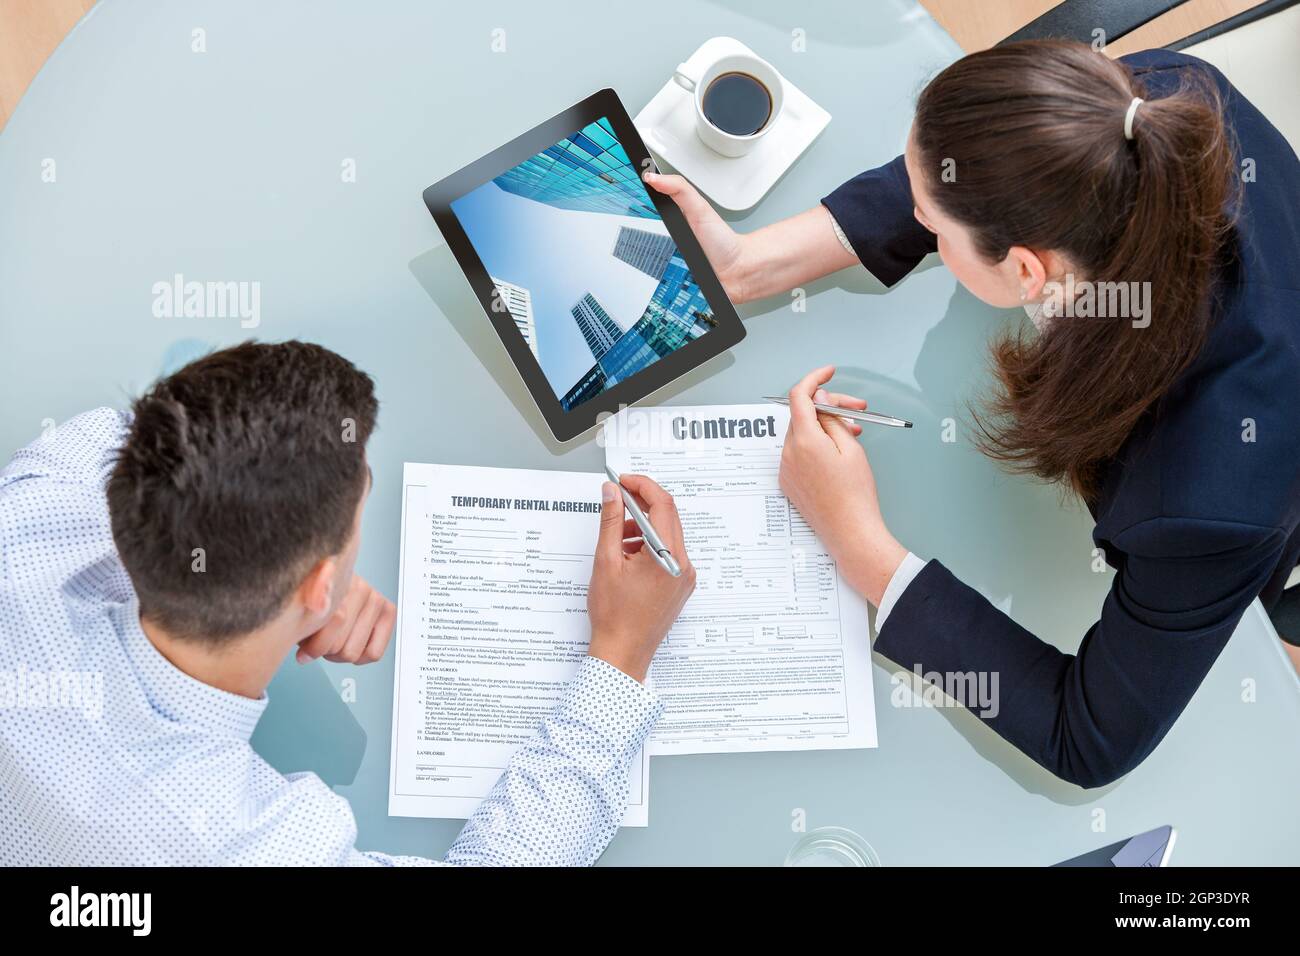 Young business couple discussing rental agreement. Woman showing man office buildings on digital tablet at table. Stock Photo